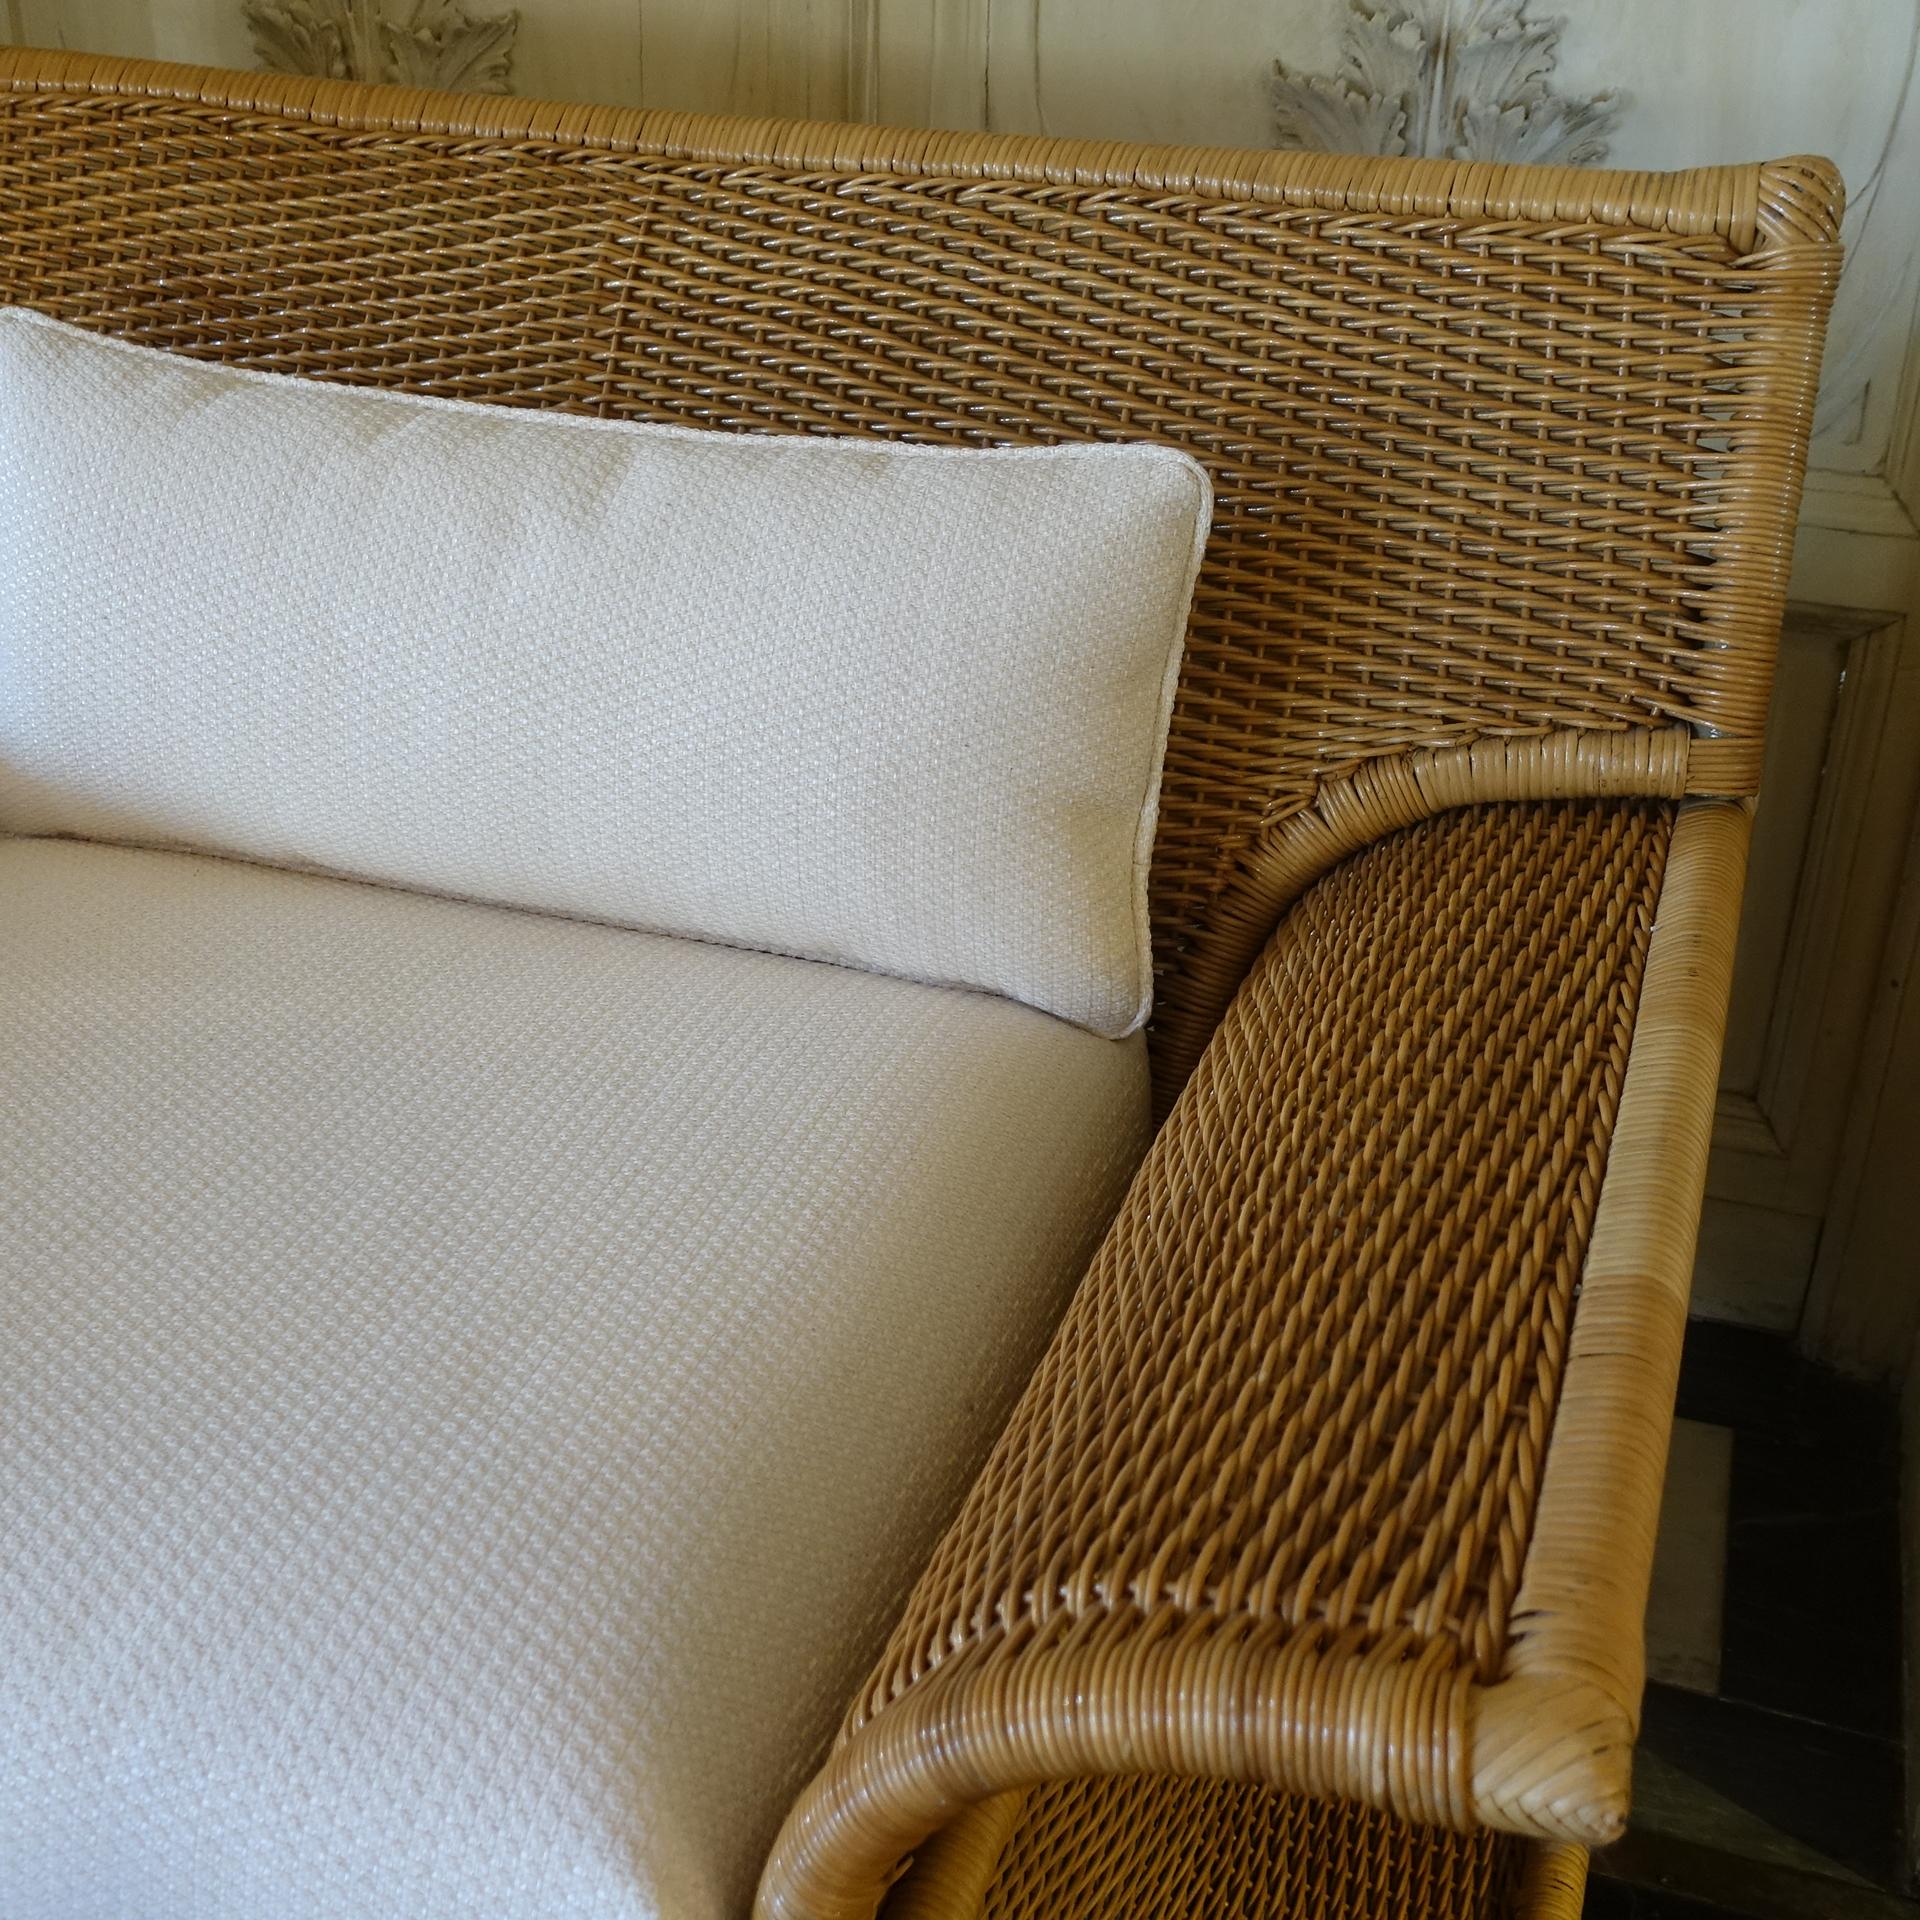 Late 20th Century 1970's Italian Armchair in Rattan and White Rafia Fabric For Sale